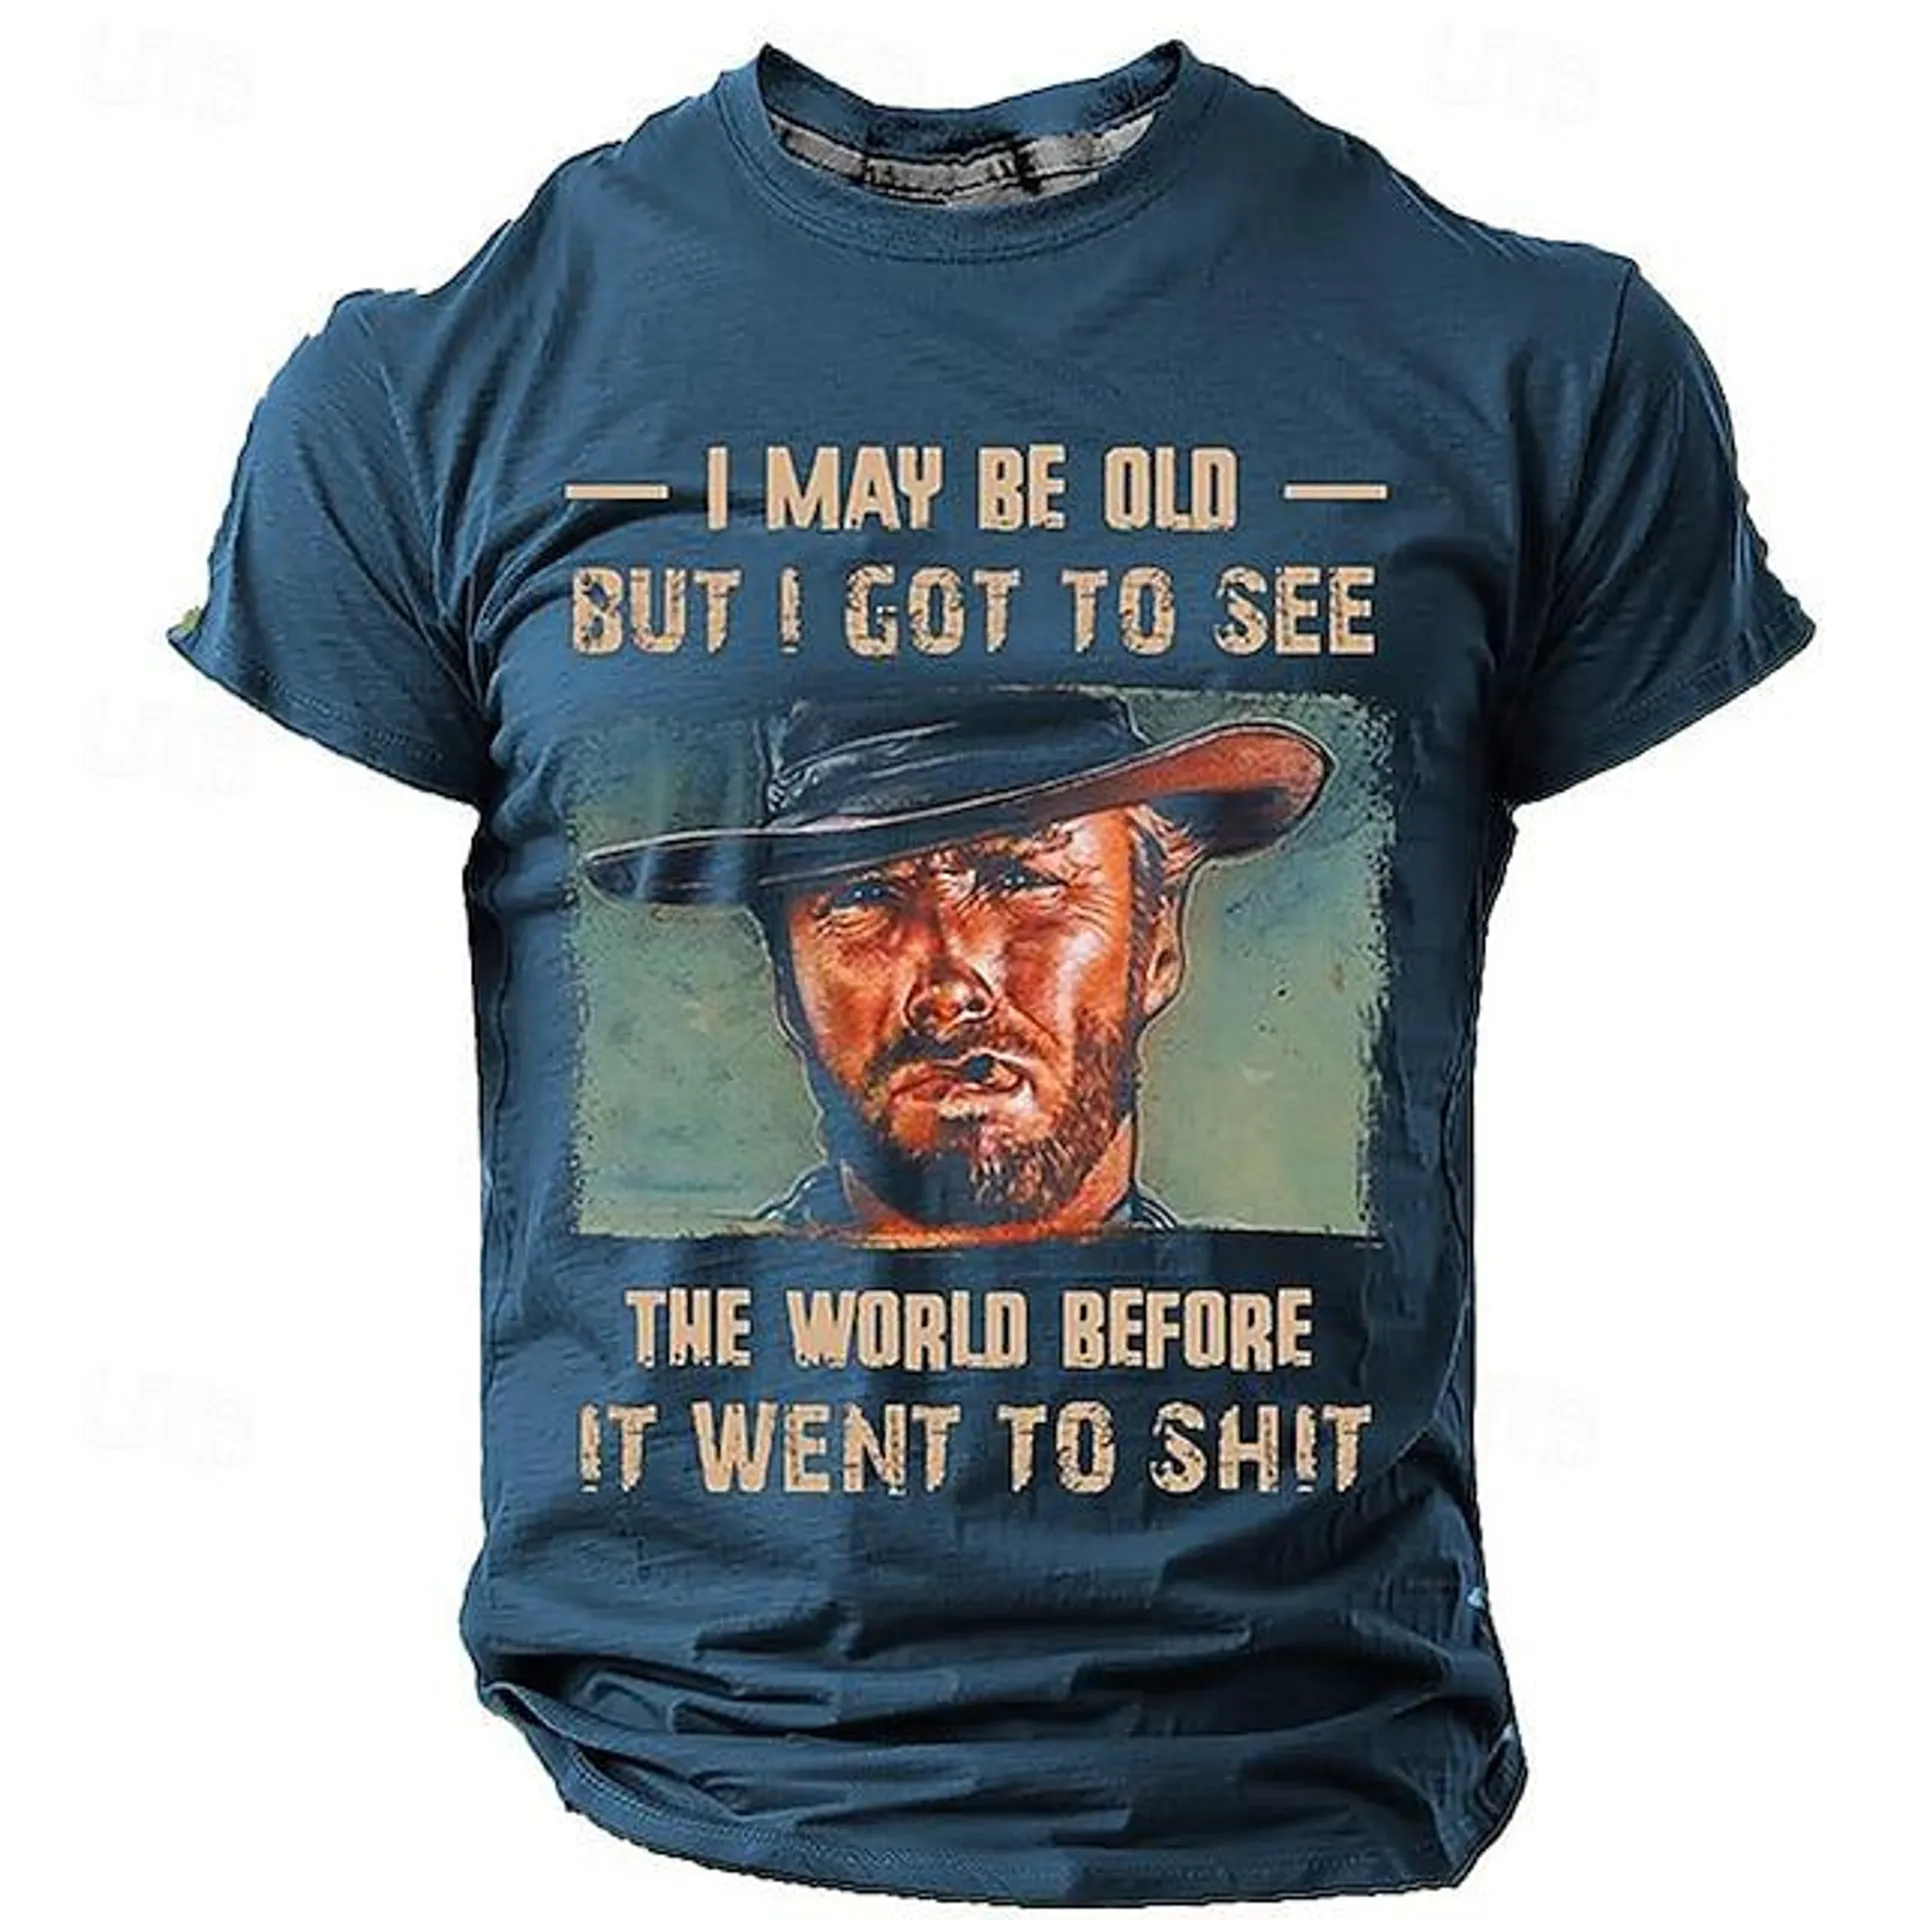 Clint Eastwood T Shirts I May Be Old but I Got to See Retro Vintage Casual Street Style Men's 3D Print T shirt Tee Sports Outdoor Holiday Going out T shirt Black Short Sleeve Crew Neck Shirt